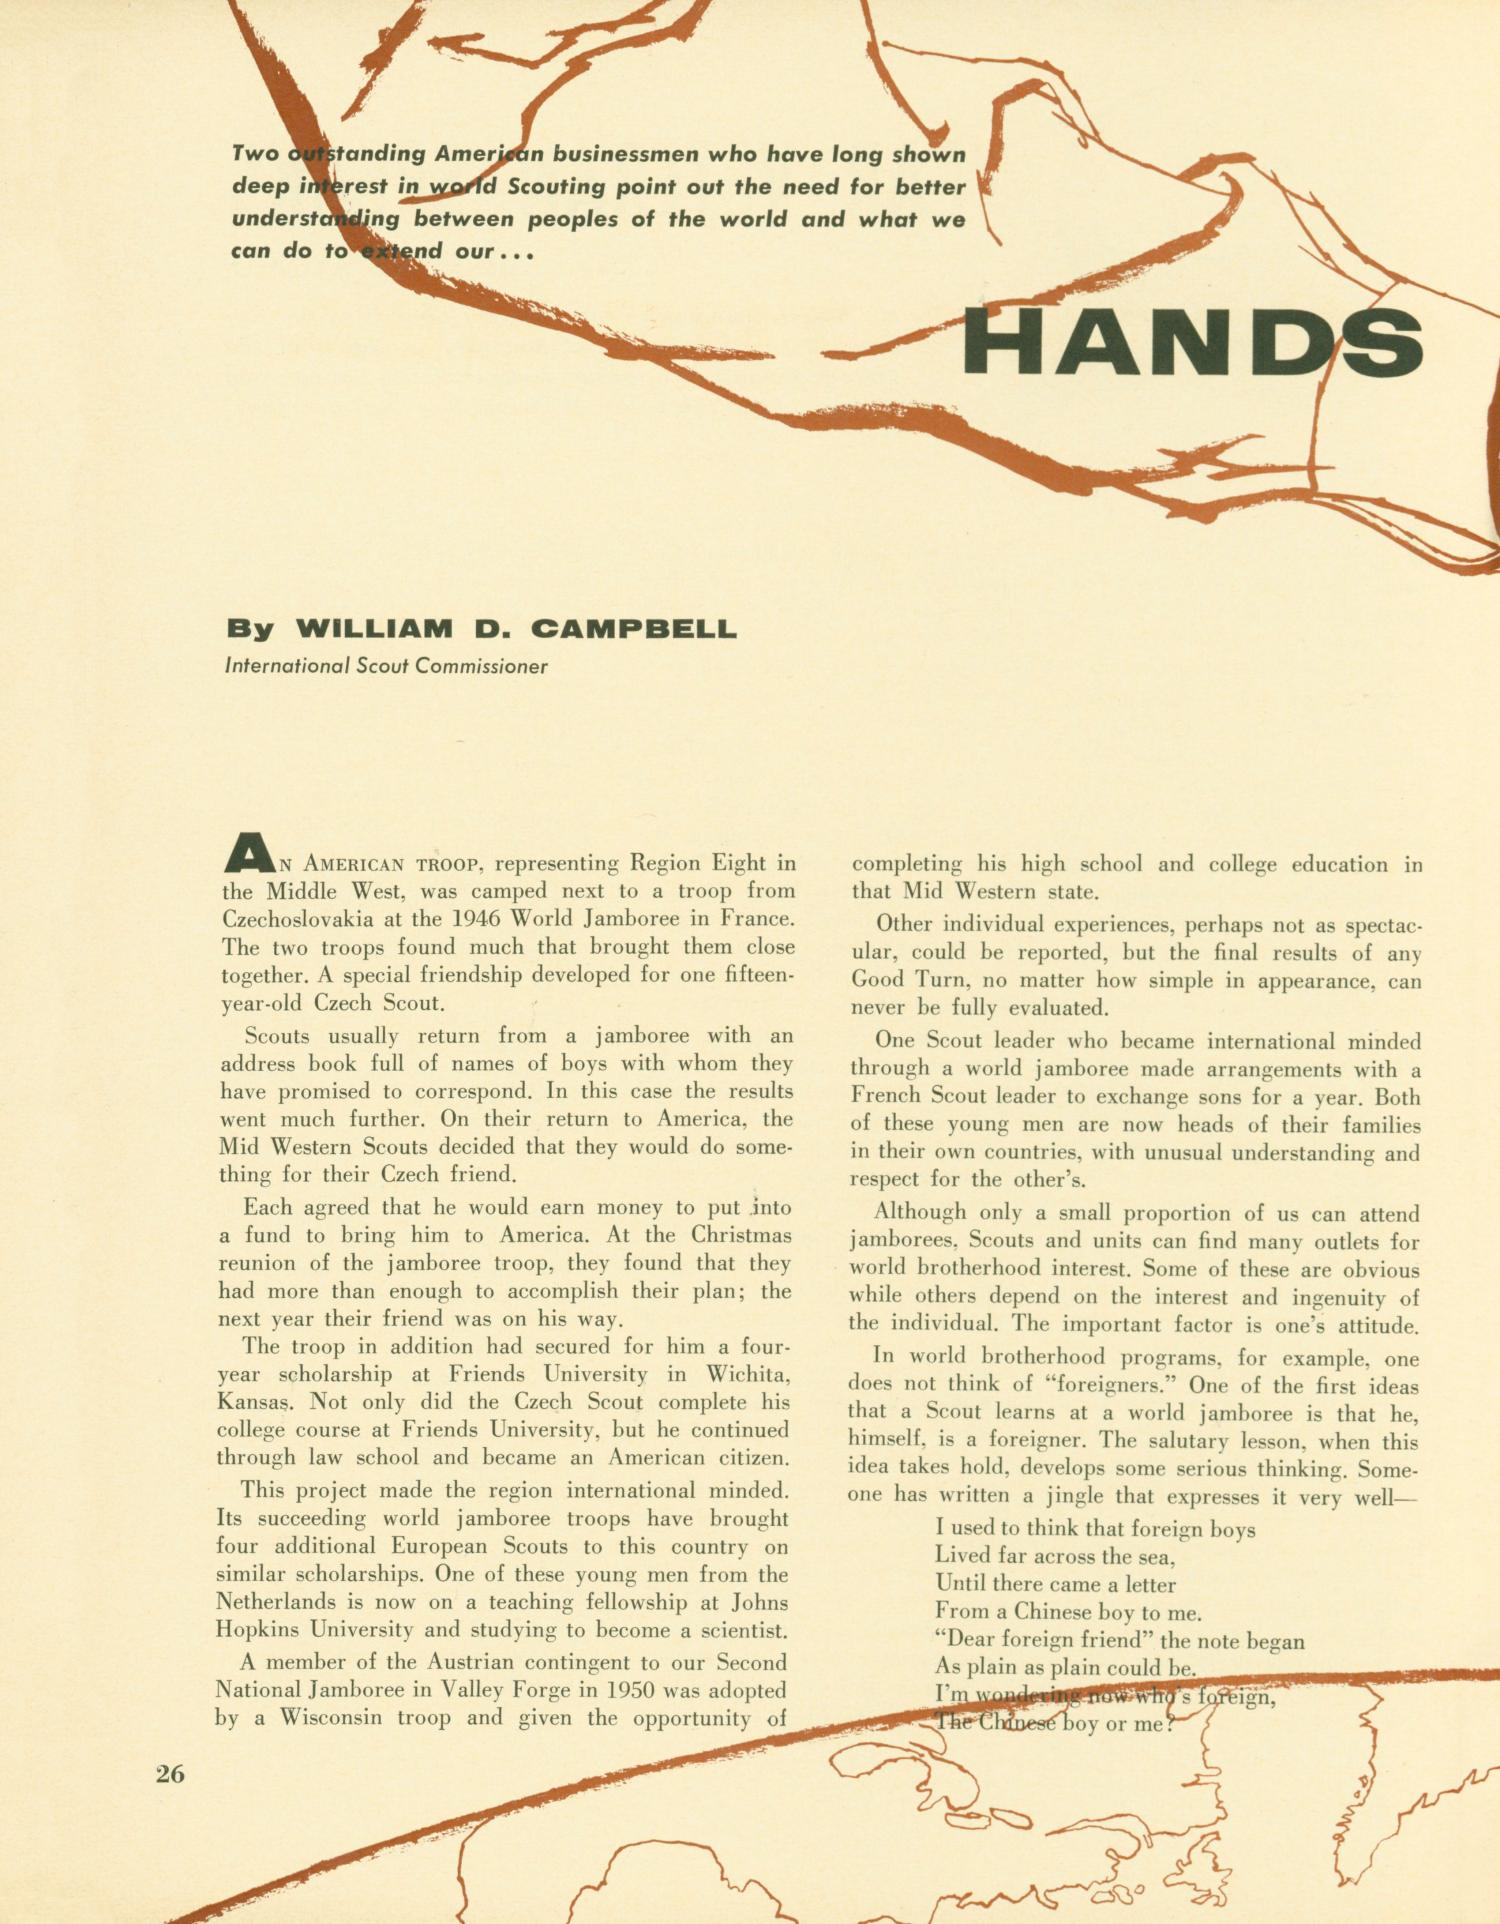 Scouting, Volume 48, Number 2, February 1960
                                                
                                                    26
                                                